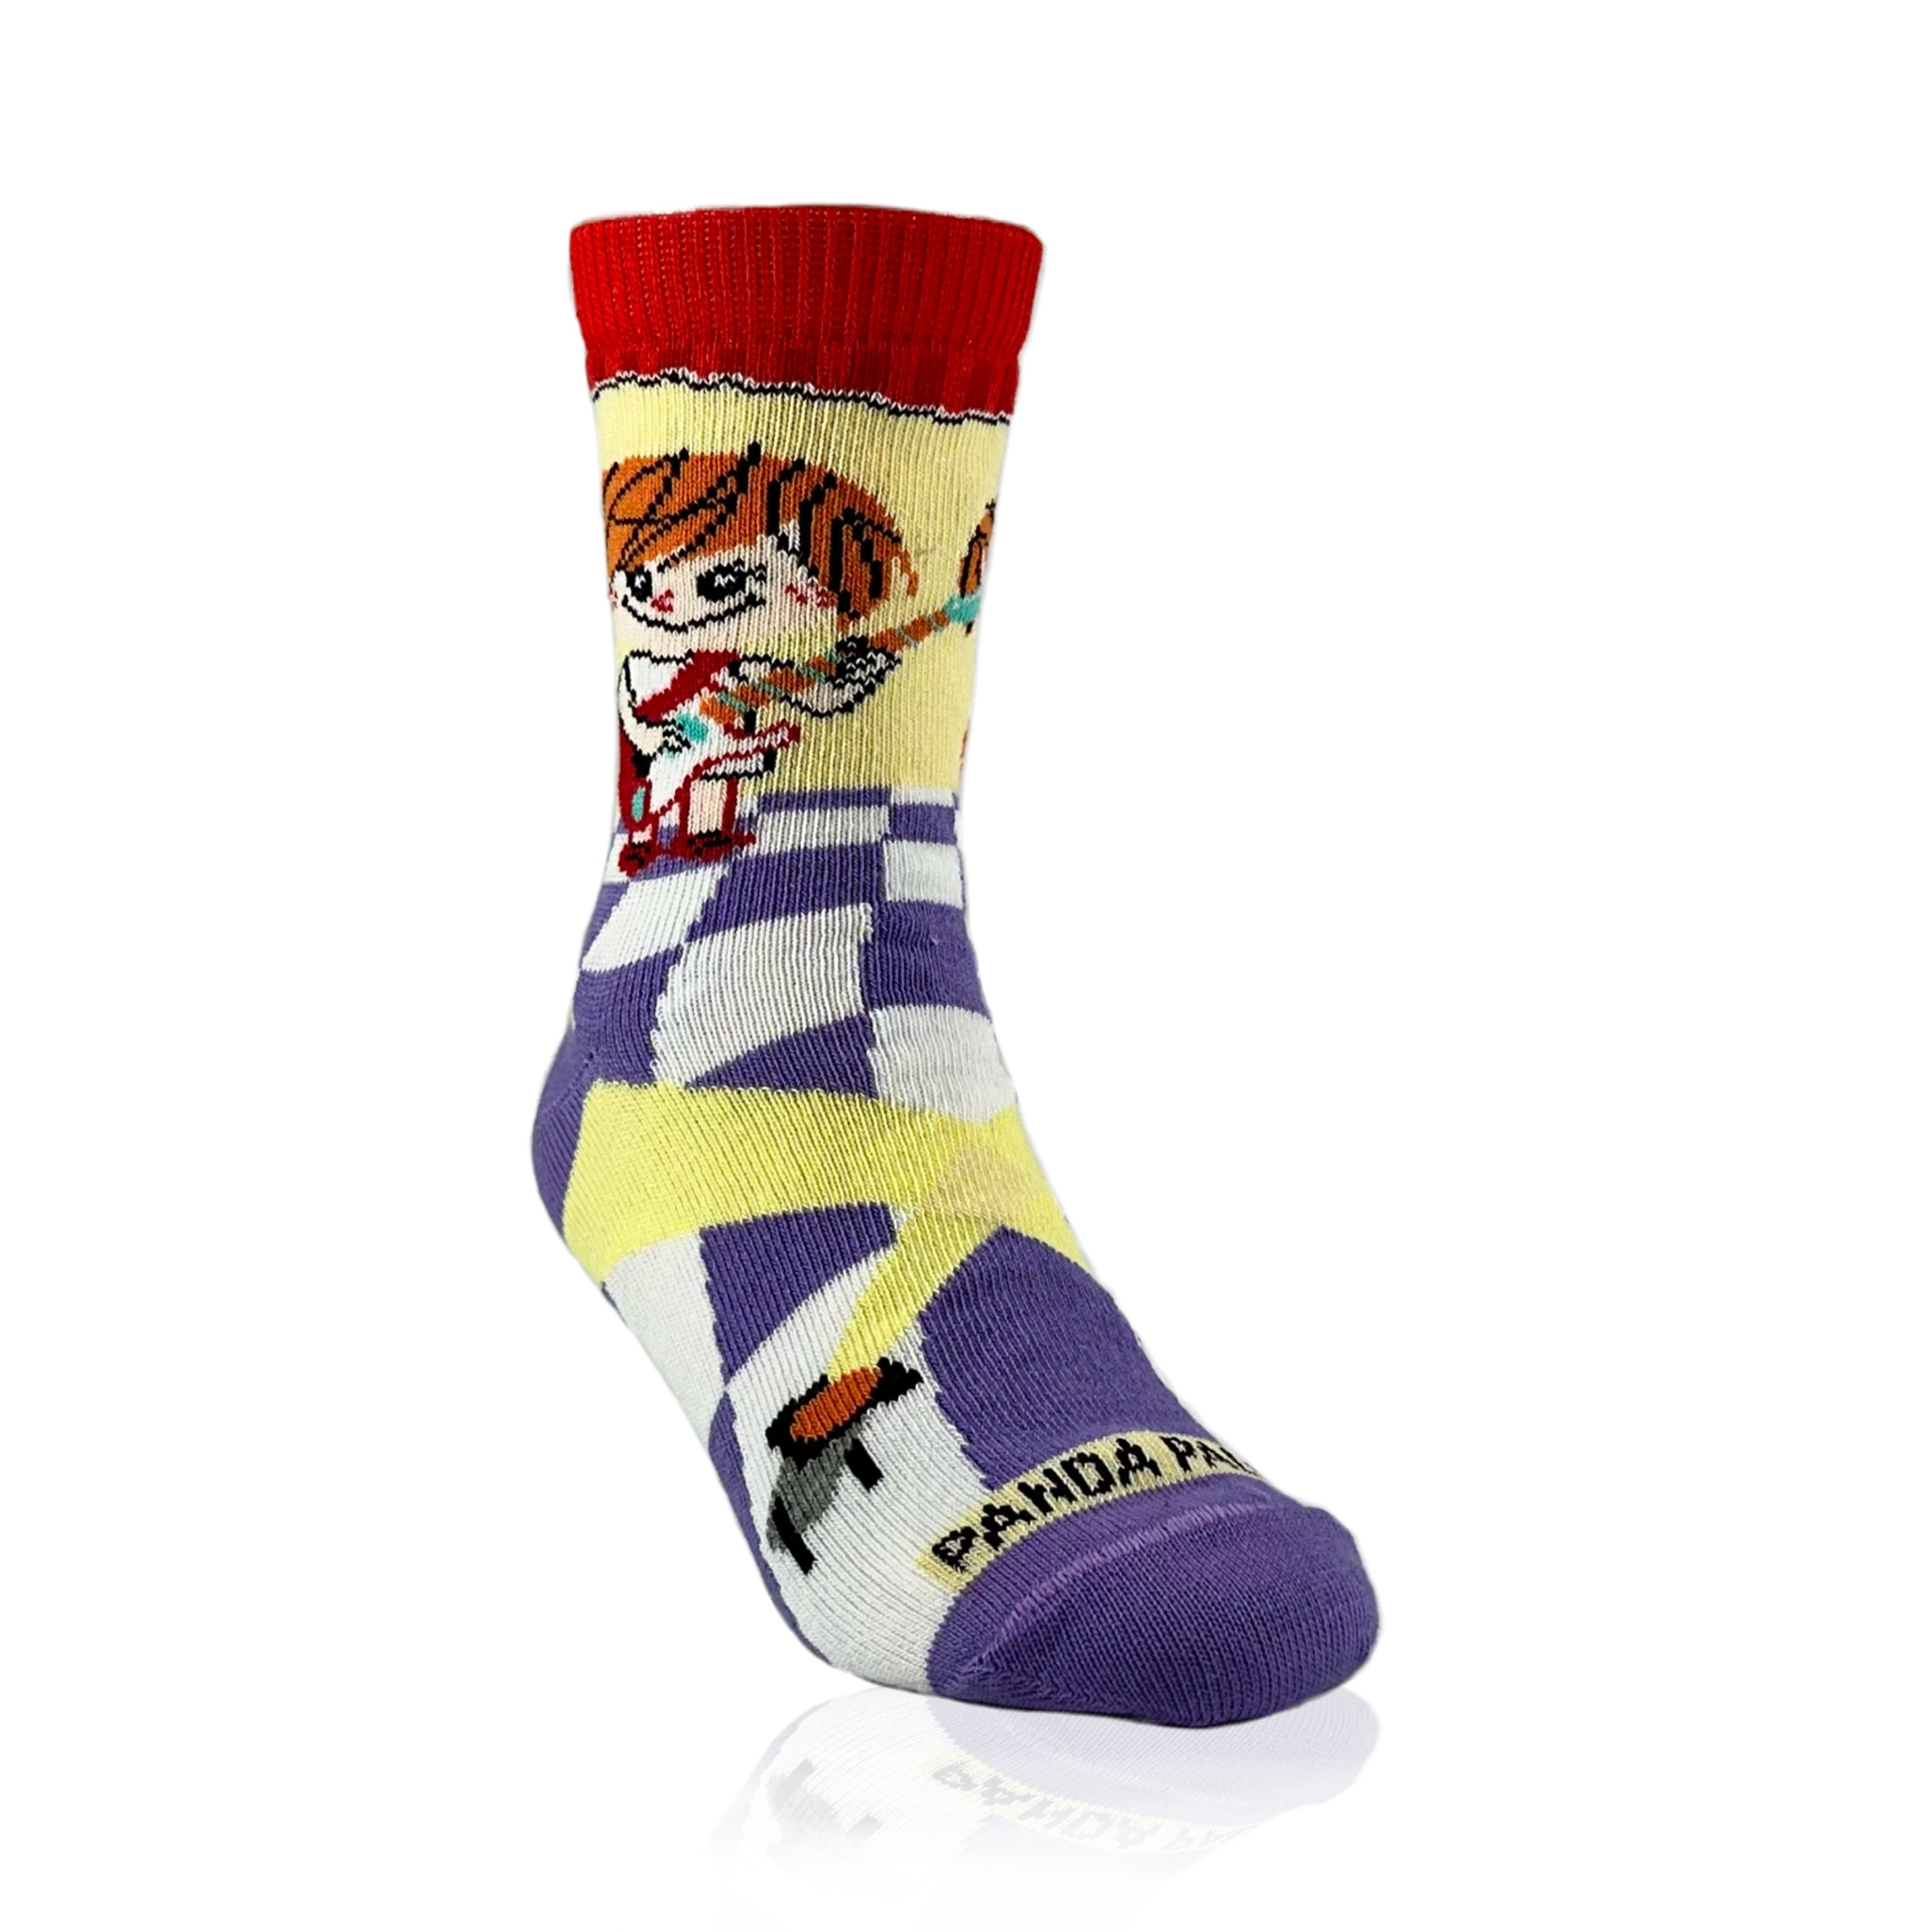 Kids Playing the Guitar Socks from the Sock Panda (Ages 3-7)